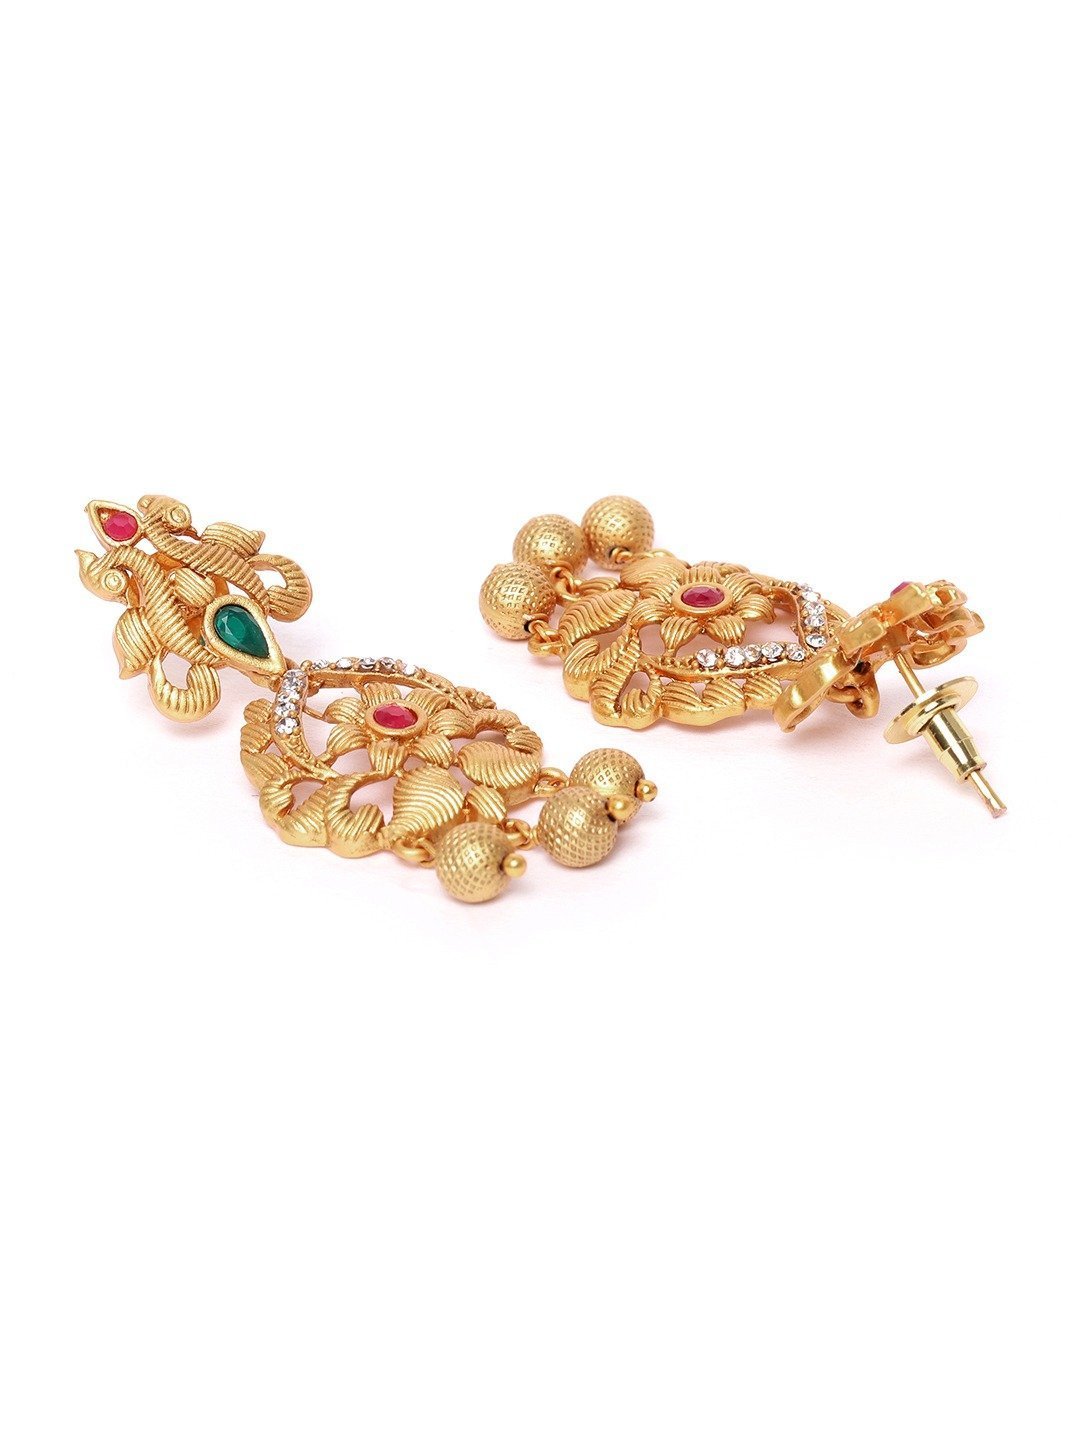 Women's Ruby Emerald Beads Gold Plated Floral Peacock Jewellery Set - Priyaasi